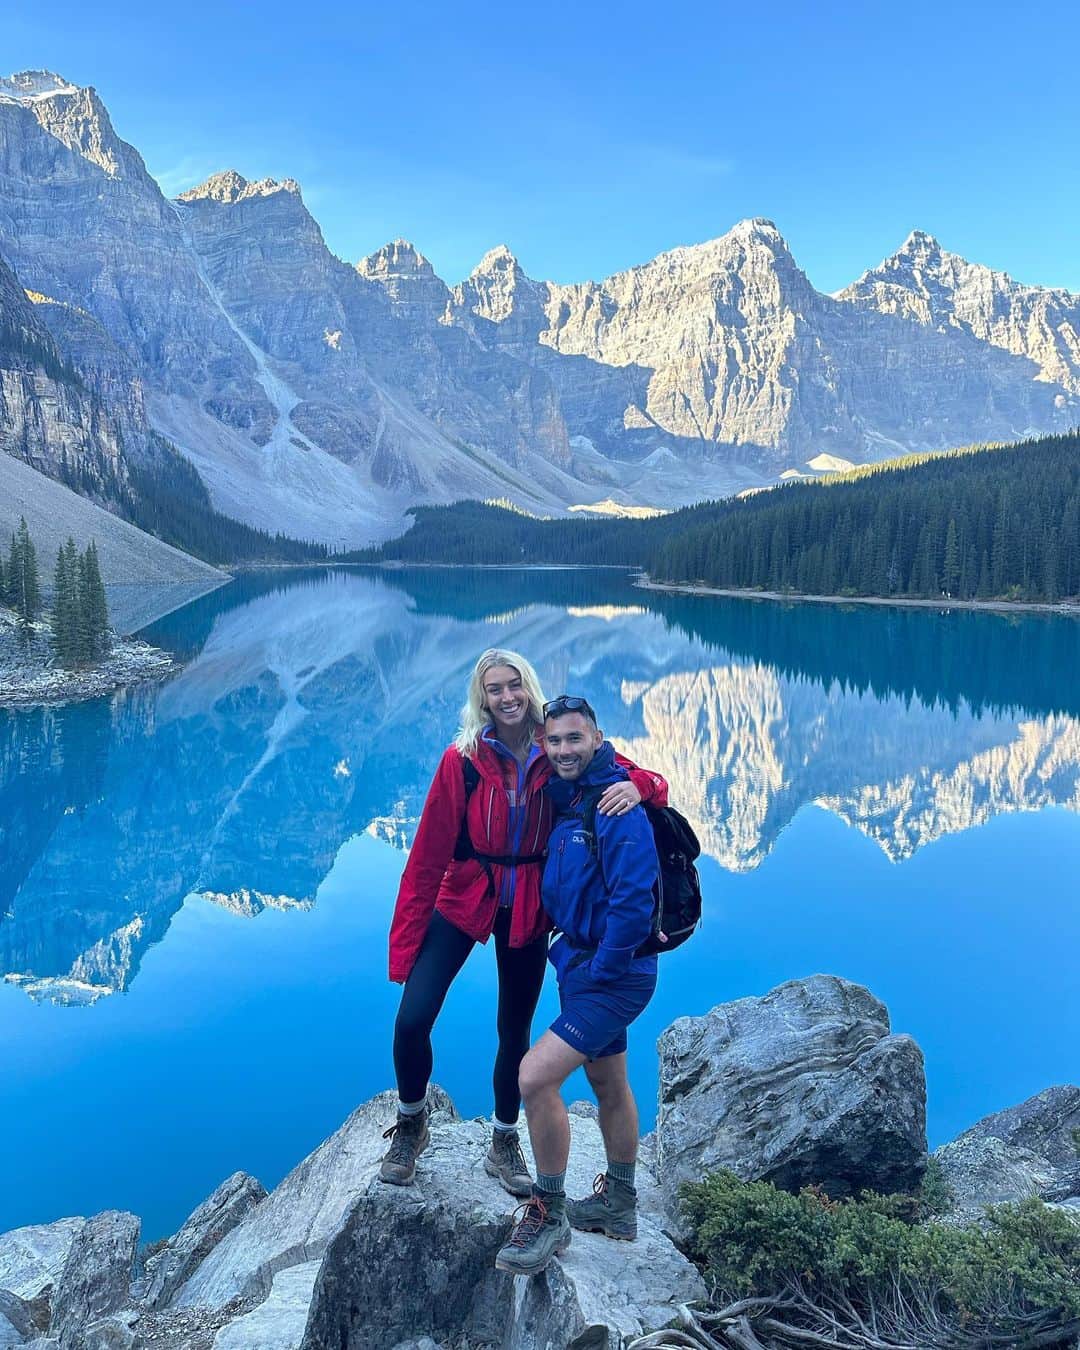 Zanna Van Dijkのインスタグラム：「Banff Photo Dump + TIPS 🇨🇦   Hit SAVE + TAG your adventure buddy! ⛰️   We couldn’t visit Canada and not experience the iconic landscapes and lakes of Banff national park. It’s definitely a more popular destination and for good reason - it is STUNNING! 🤩   🥾 Hike: I highly recommend exploring the trails around the main attractions (like Lake Louise/Moraine) as you’ll often get better views and escape the crowds. Here are some of our favourite routes: ➡️ Little Beehive Lookout (above Lake Louise) ➡️ Eiffel Lake (from Lake Moraine)  ➡️ Cirque Peak via Helen Lake (our favourite hike, very spicy & scrambly)  🧗‍♀️ Climb: If you want to try via ferrata for the first time, check out the Mount Norquay route on the peaks above Banff. You get a guide & it’s perfect for beginners!  🌊 Swim: We swam every day, our favourite spots for a dip included: ➡️ Helen Lake  ➡️ Eiffel Lake  ➡️ Two Jack Lake  These three are not as glacial as many lakes in Banff, but still cold and refreshing.  🚗 Travel: You definitely need a car to get around and access many trailheads. Some great scenic roads include: ➡️ Icefields Parkway  ➡️ Bow Valley Parkway   🏨 Stay: We stayed at @basecampsuitesbanff. Each room has its own kitchenette, which is super useful when you’re prepping your own breakfasts & packed lunches every day.  LOTS more info will be in my full Banff travel guide on my website in a few weeks 🥰🇨🇦 #banff #banffnationalpark #banffcanada #banffalberta #banfflife #albertacanada #explorealberta #morainelake」